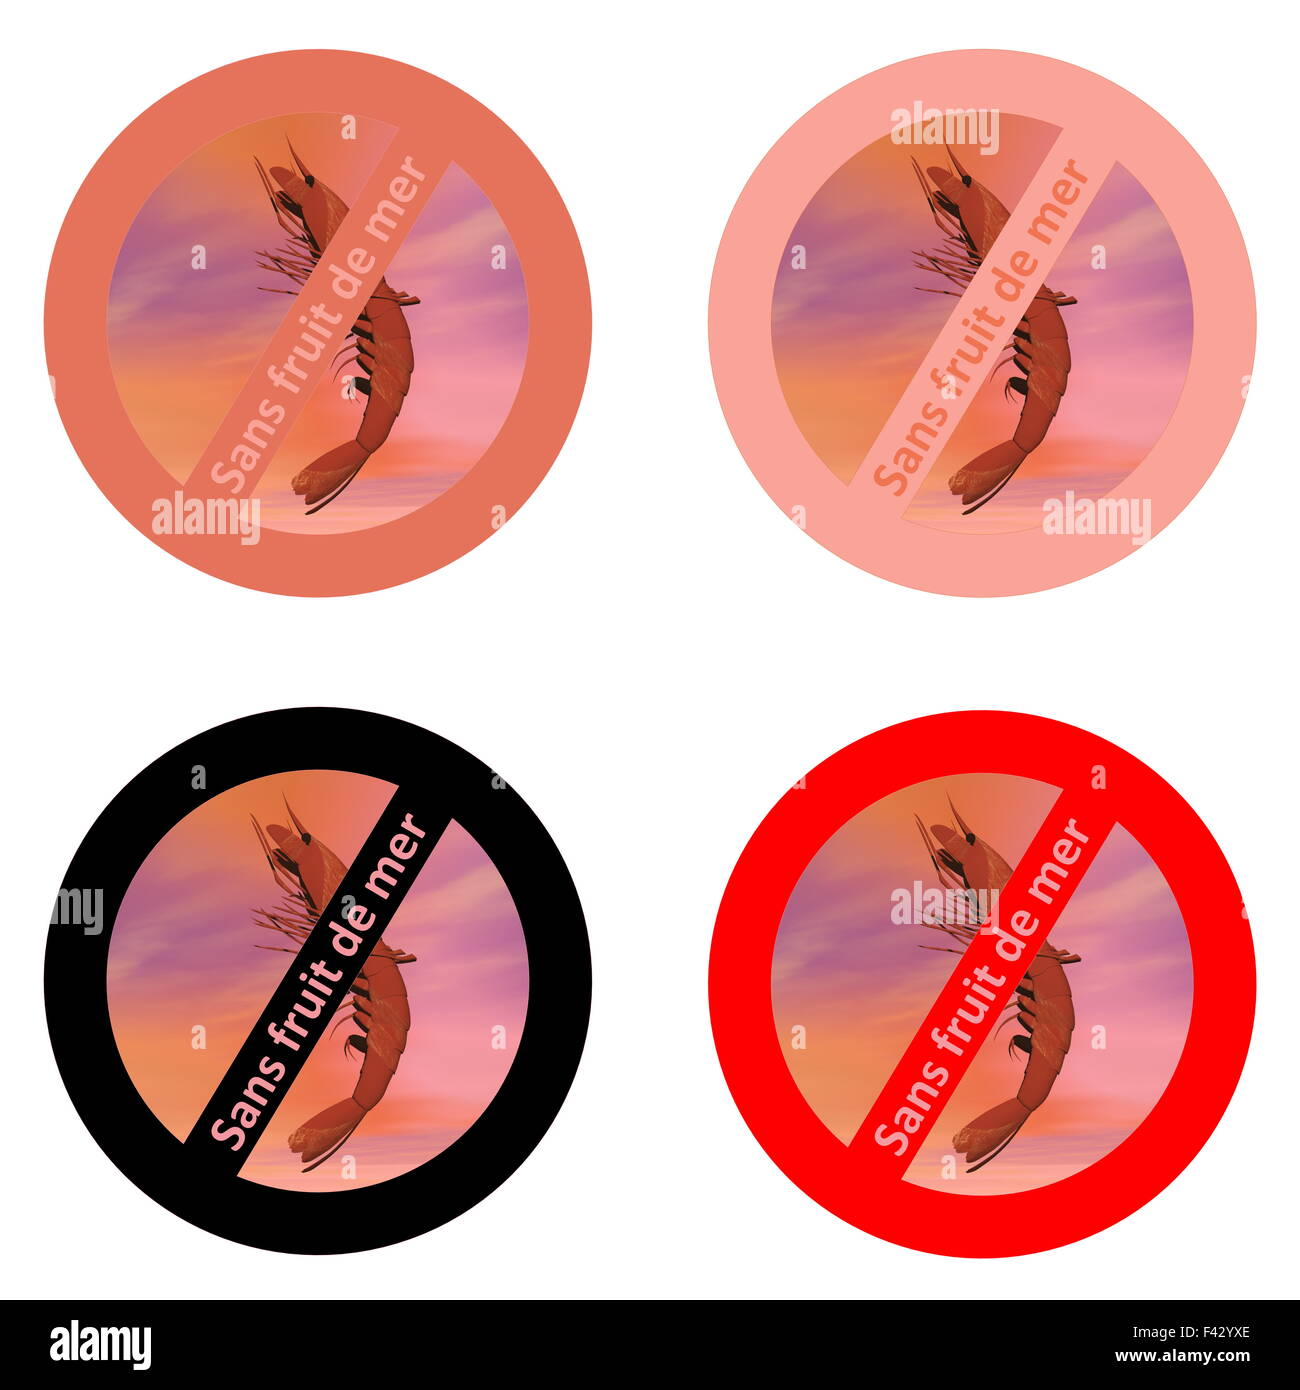 French stickers for shellfish free products Stock Photo